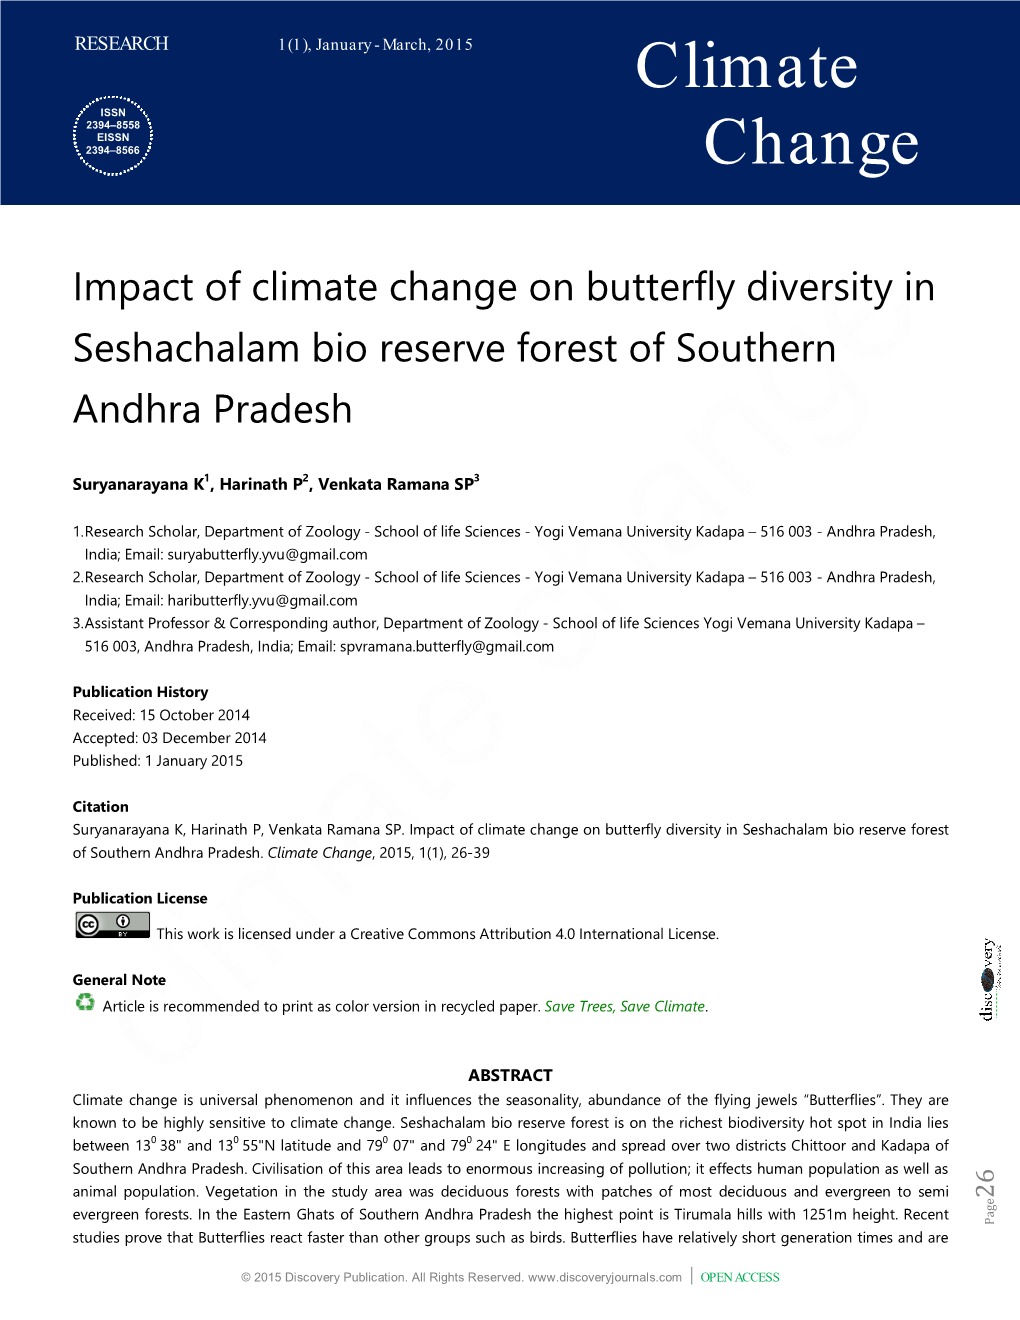 Climate Change on Butterfly Diversity in Seshachalam Bio Reserve Forest of Southern Andhra Pradesh